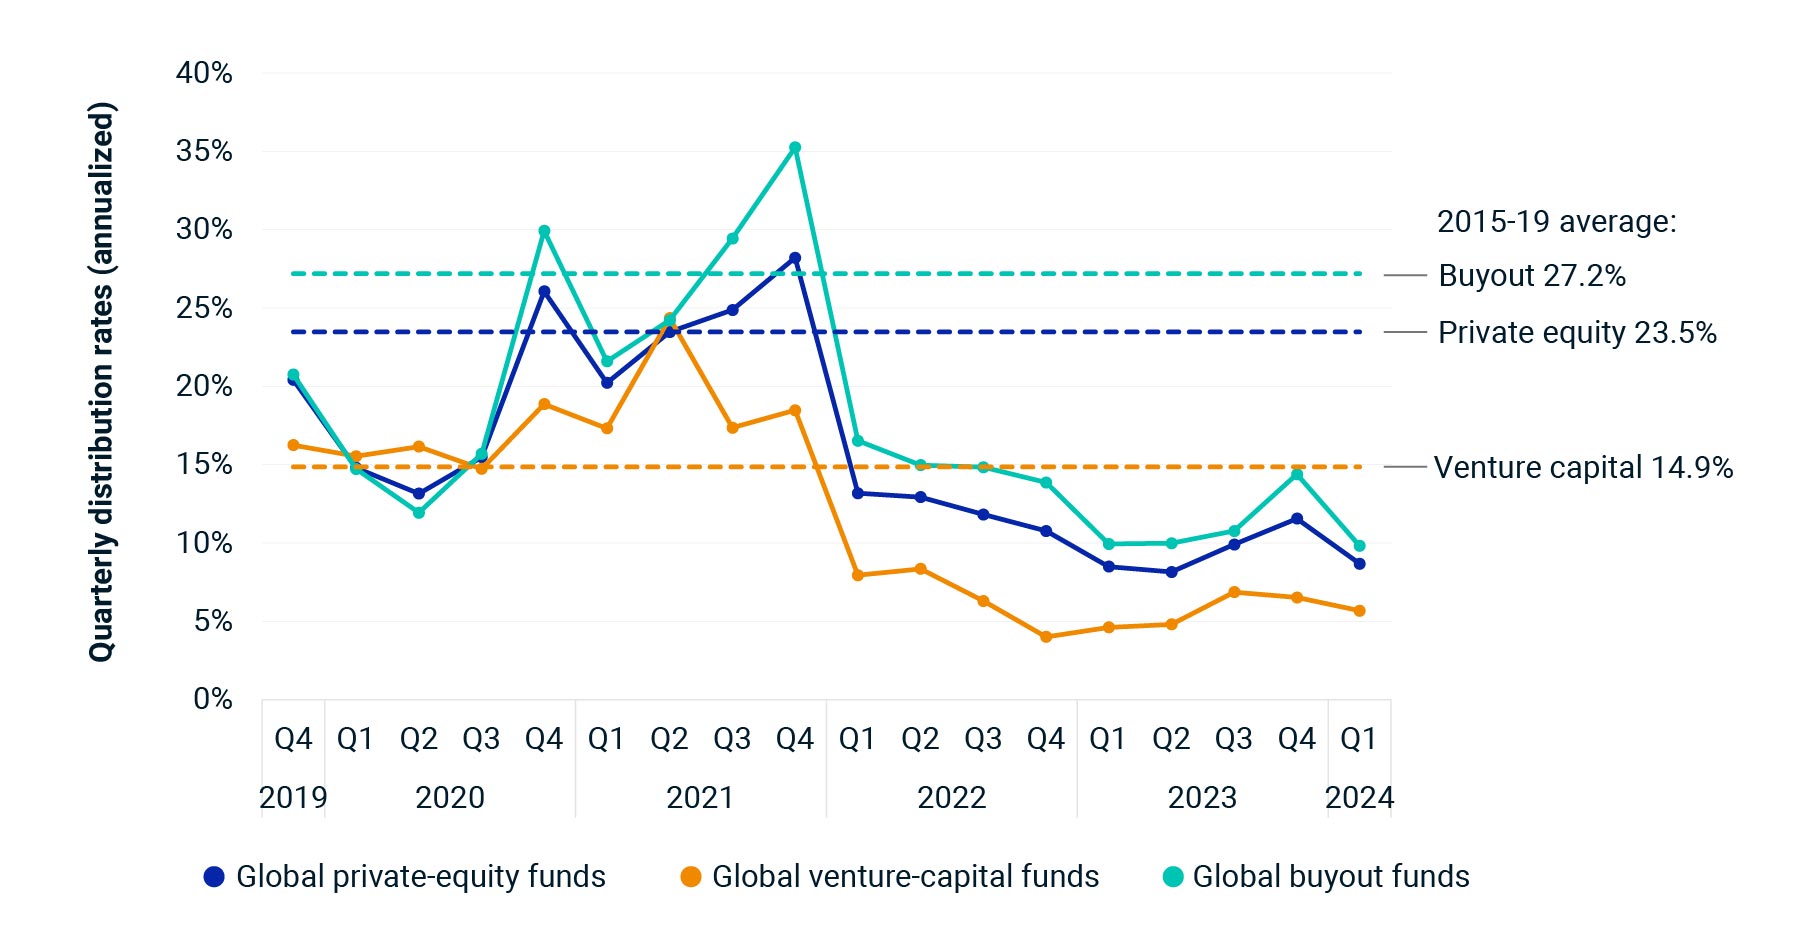 The chart is a line graph that shows the quarterly distribution rates (annualized) for three types of funds: global private-equity funds, global venture-capital funds, and global buyout funds, from Q4 2019 to Q1 2024. The rates are presented as percentages and the graph includes historical average distribution rates for the period 2015-19 for comparison. These historical averages are indicated by dashed lines for each fund type: buyout funds at 27.2%, private equity funds at 23.5%, and venture capital funds at 14.9%.